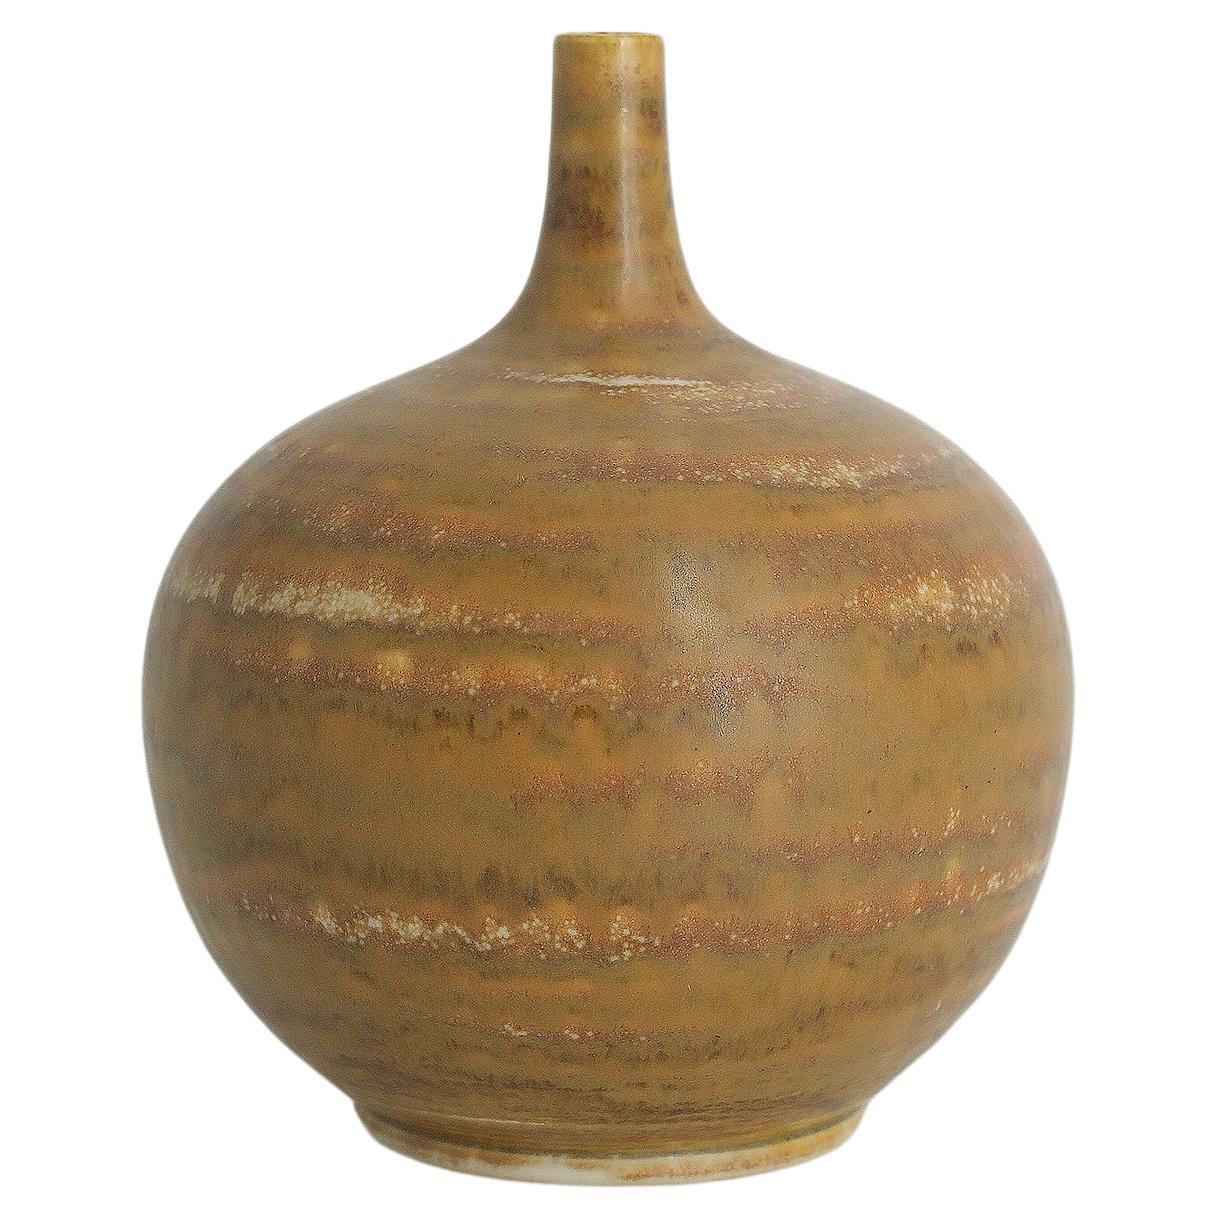 Scandinavian Modern Collectible Small Spherical Stoneware Vase by Gunnar Borg  For Sale